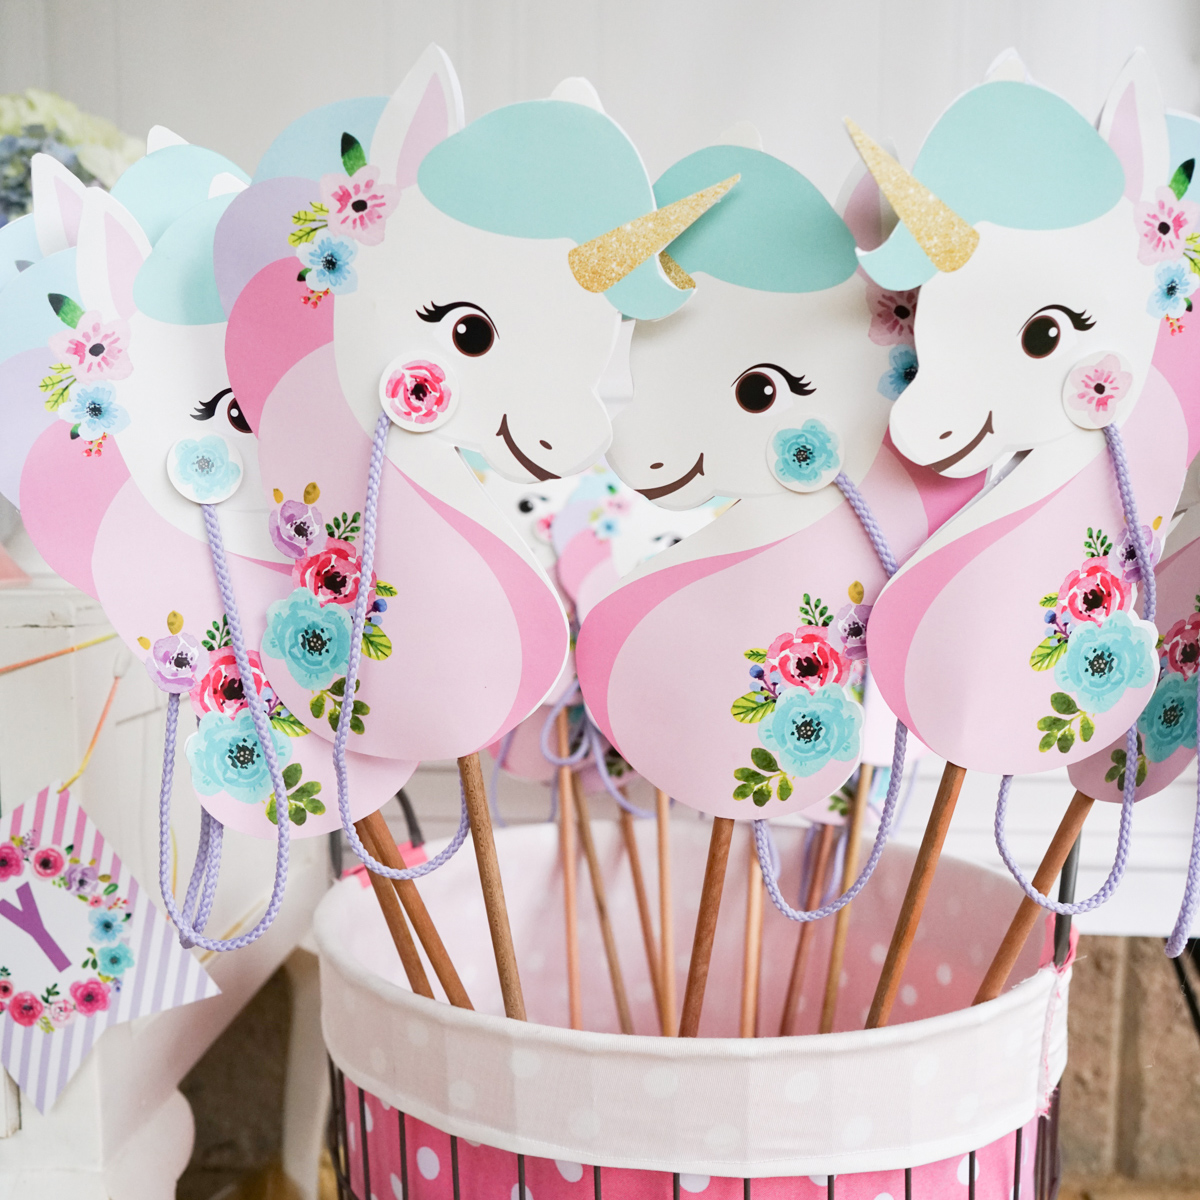 Mary Poppins party craft ideas